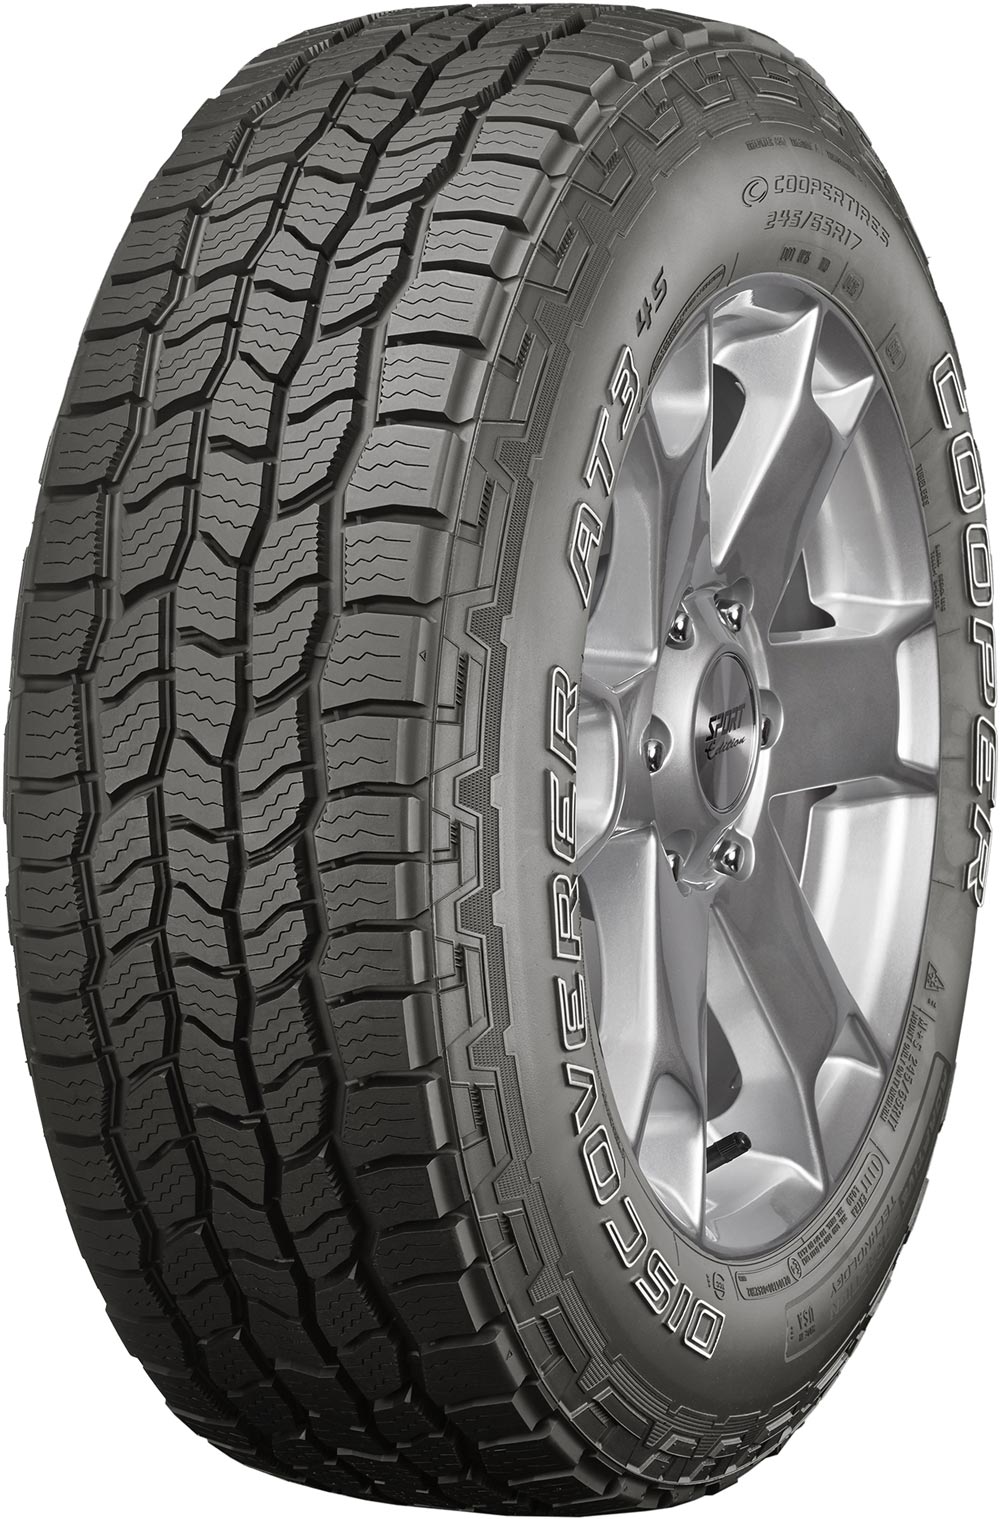 Гуми за джип COOPER DISCOVERER AT3 4S OWL 235/70 R17 109T